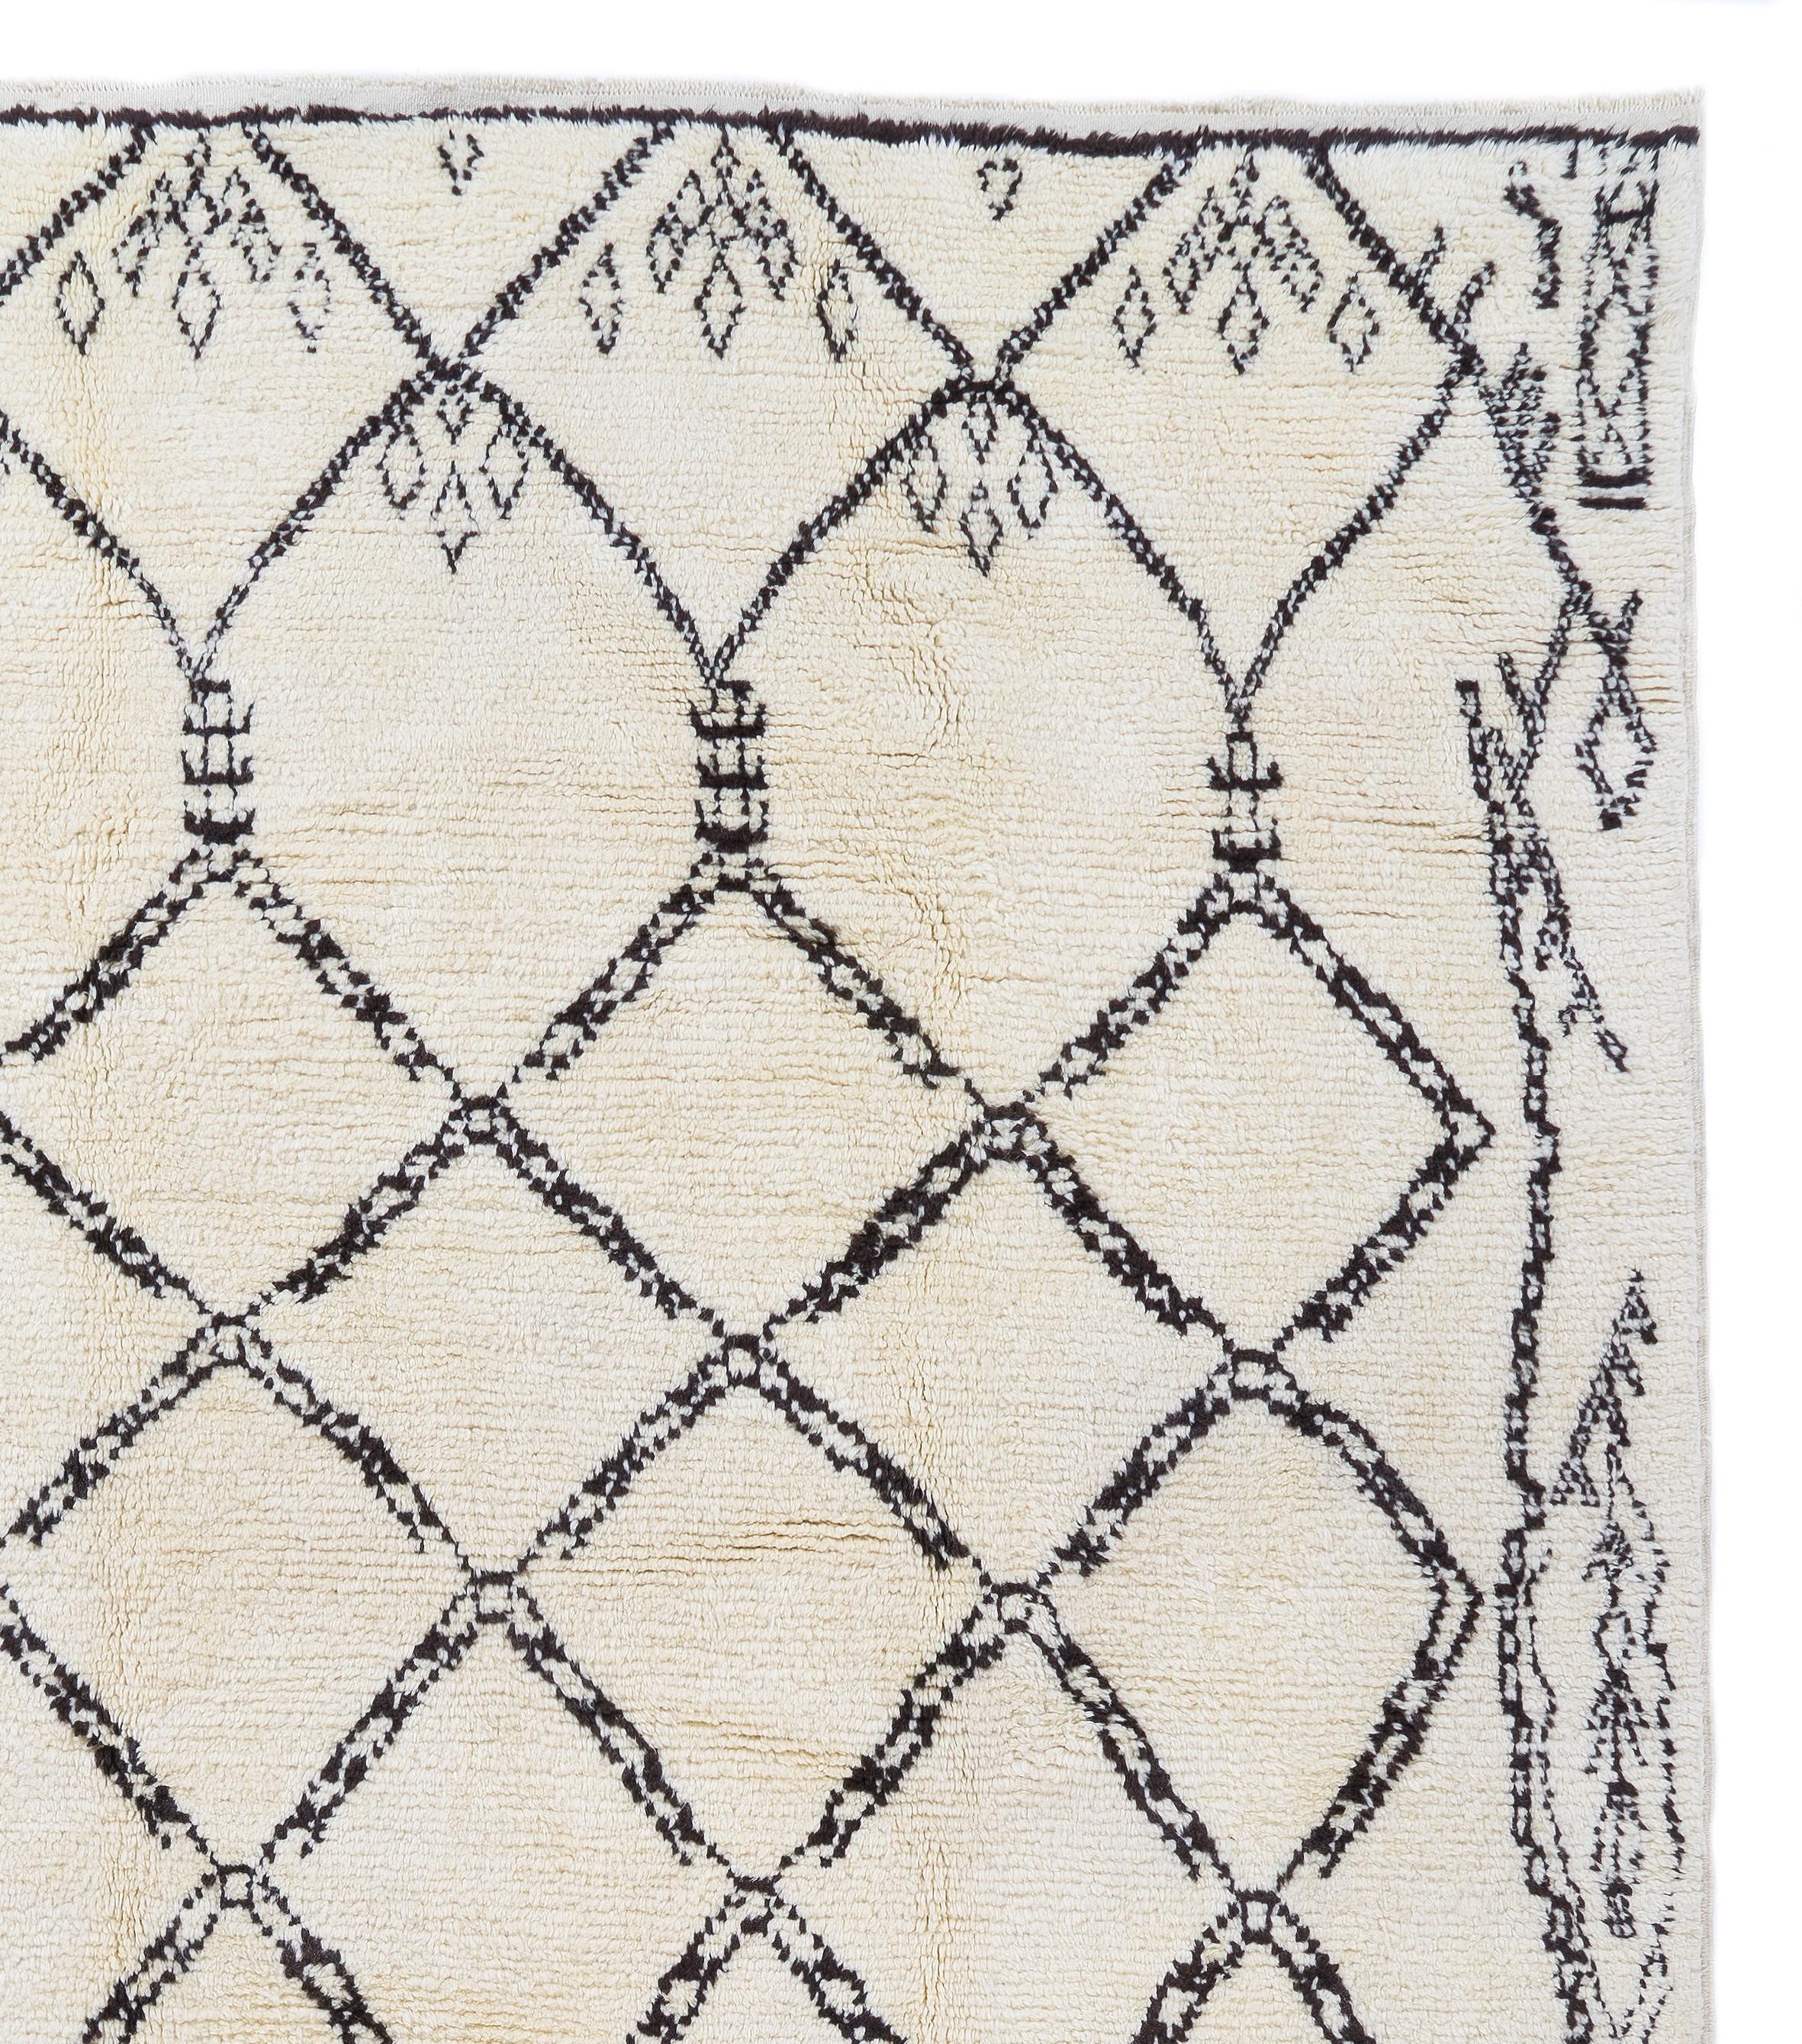 A contemporary hand-knotted Moroccan rug, made of plant dyed sheep wool. 
Soft, comfy pile that is ideal for families with kids.
Available as it is or made to measure in any size and color combination requested.